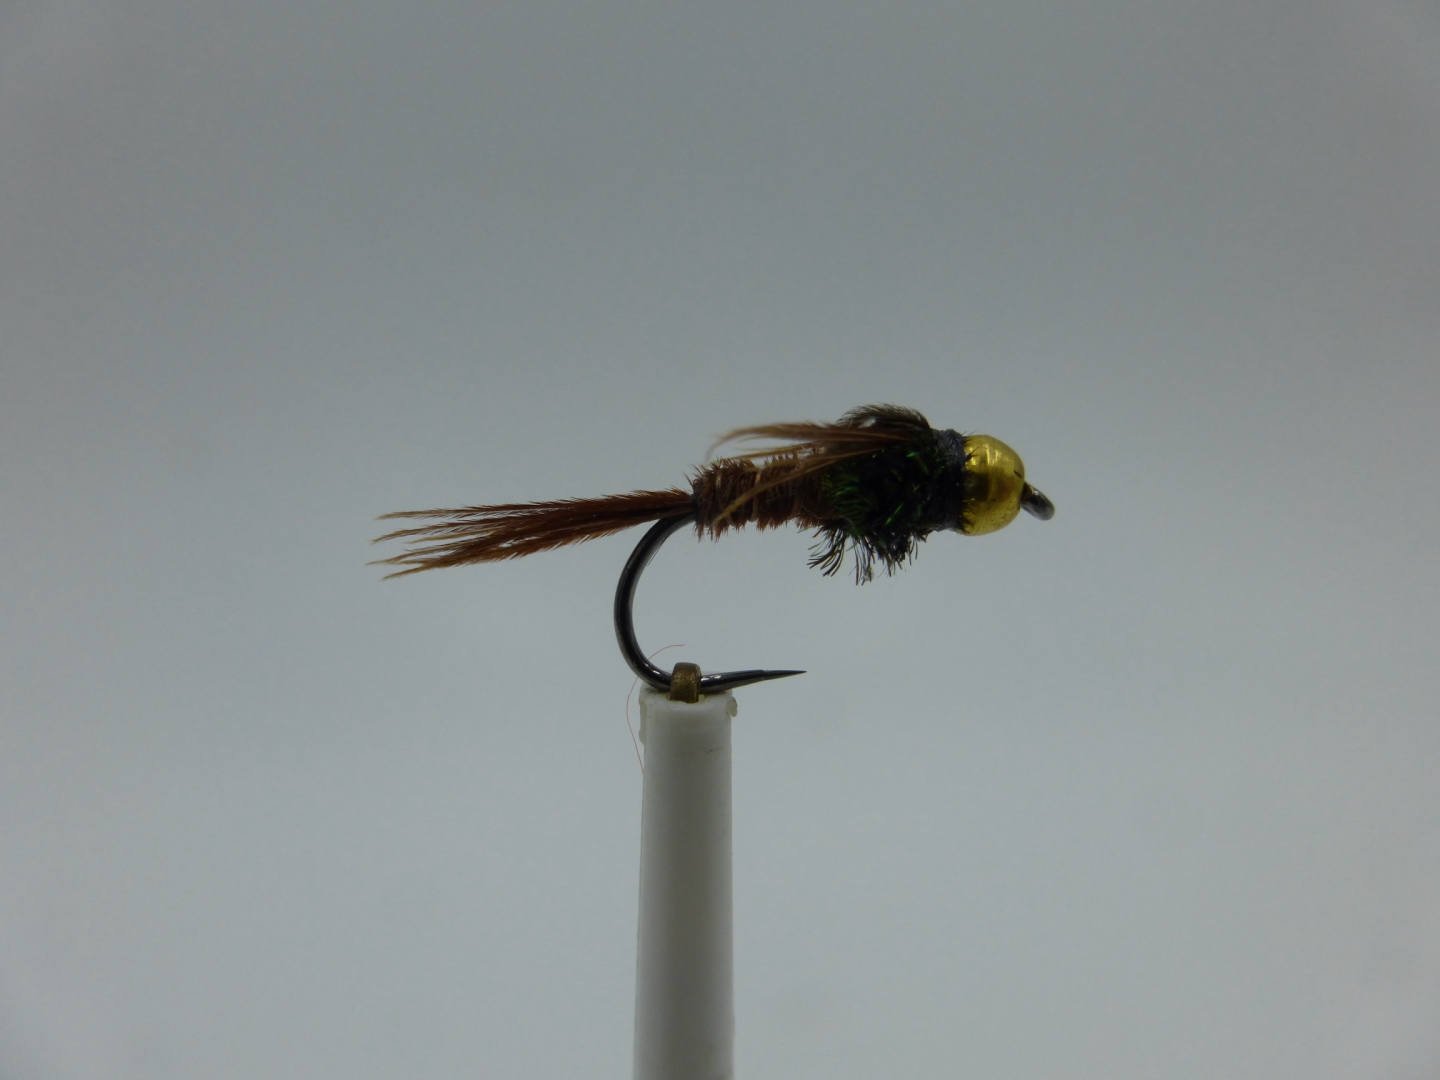 Size 18 Pheasant Tail Peacock Bead Head Barbless